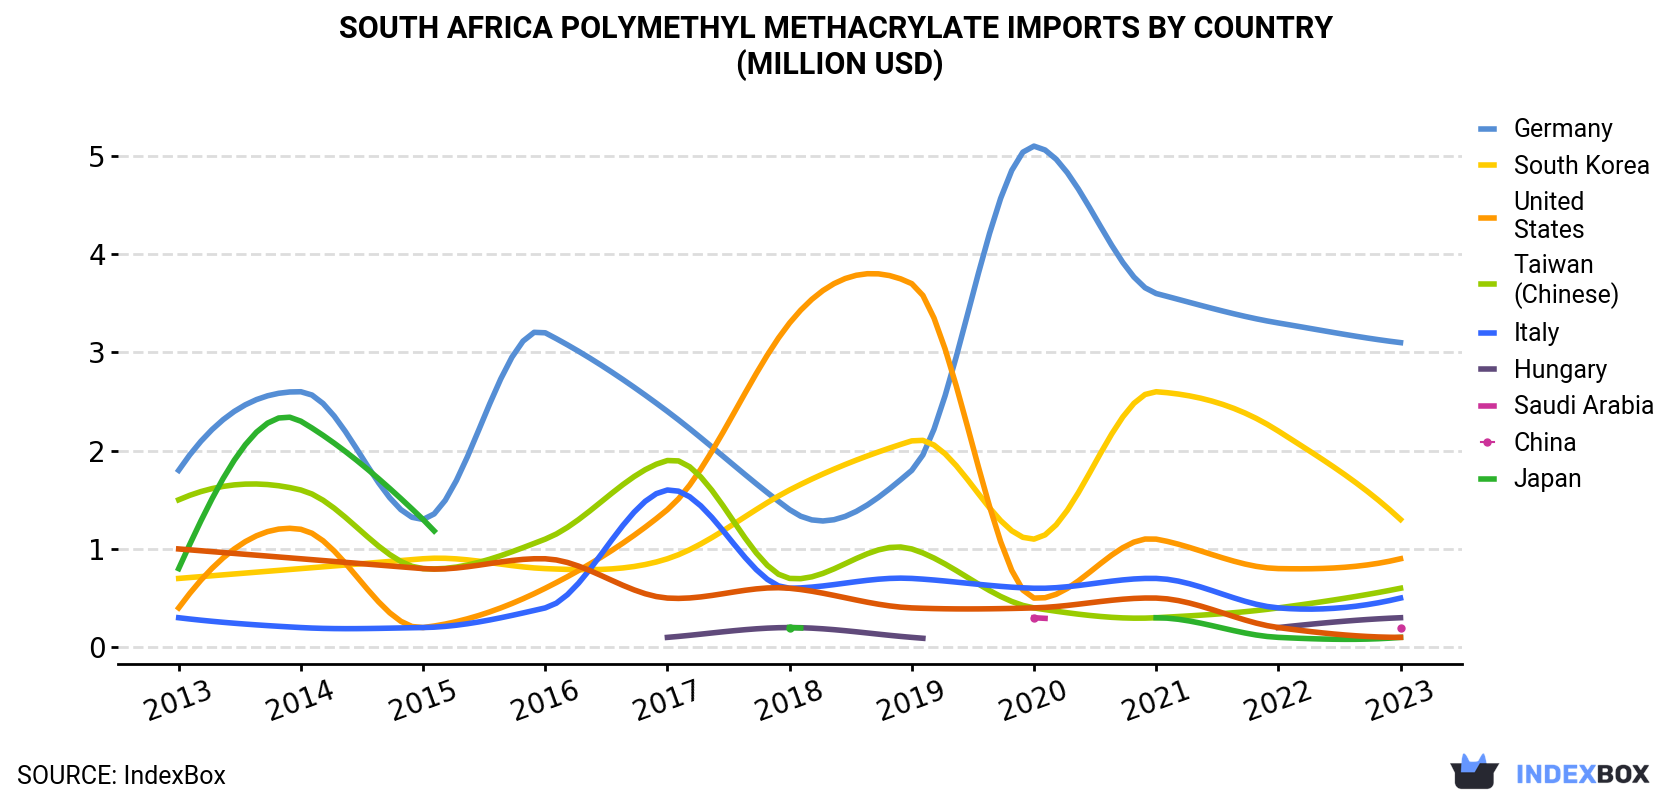 South Africa Polymethyl Methacrylate Imports By Country (Million USD)